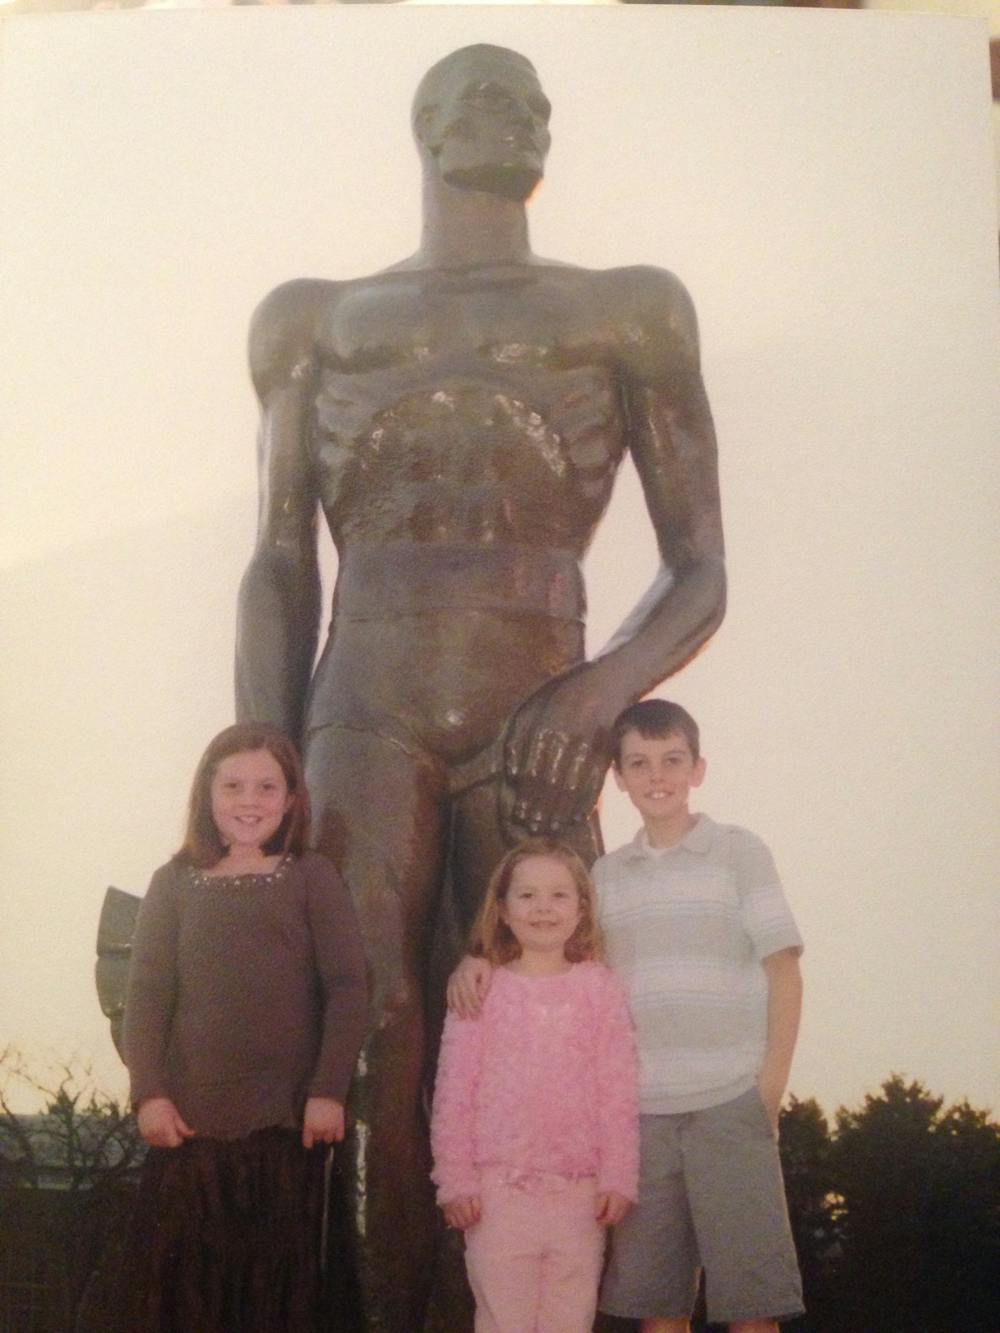 Education junior Kelly Burzych stands in between her siblings Mary Kay and Jay for a photo at the Spartan Statue on a visit in 2006. Burzych has been a local to the Greater Lansing area her entire life, and now goes to Michigan State University.